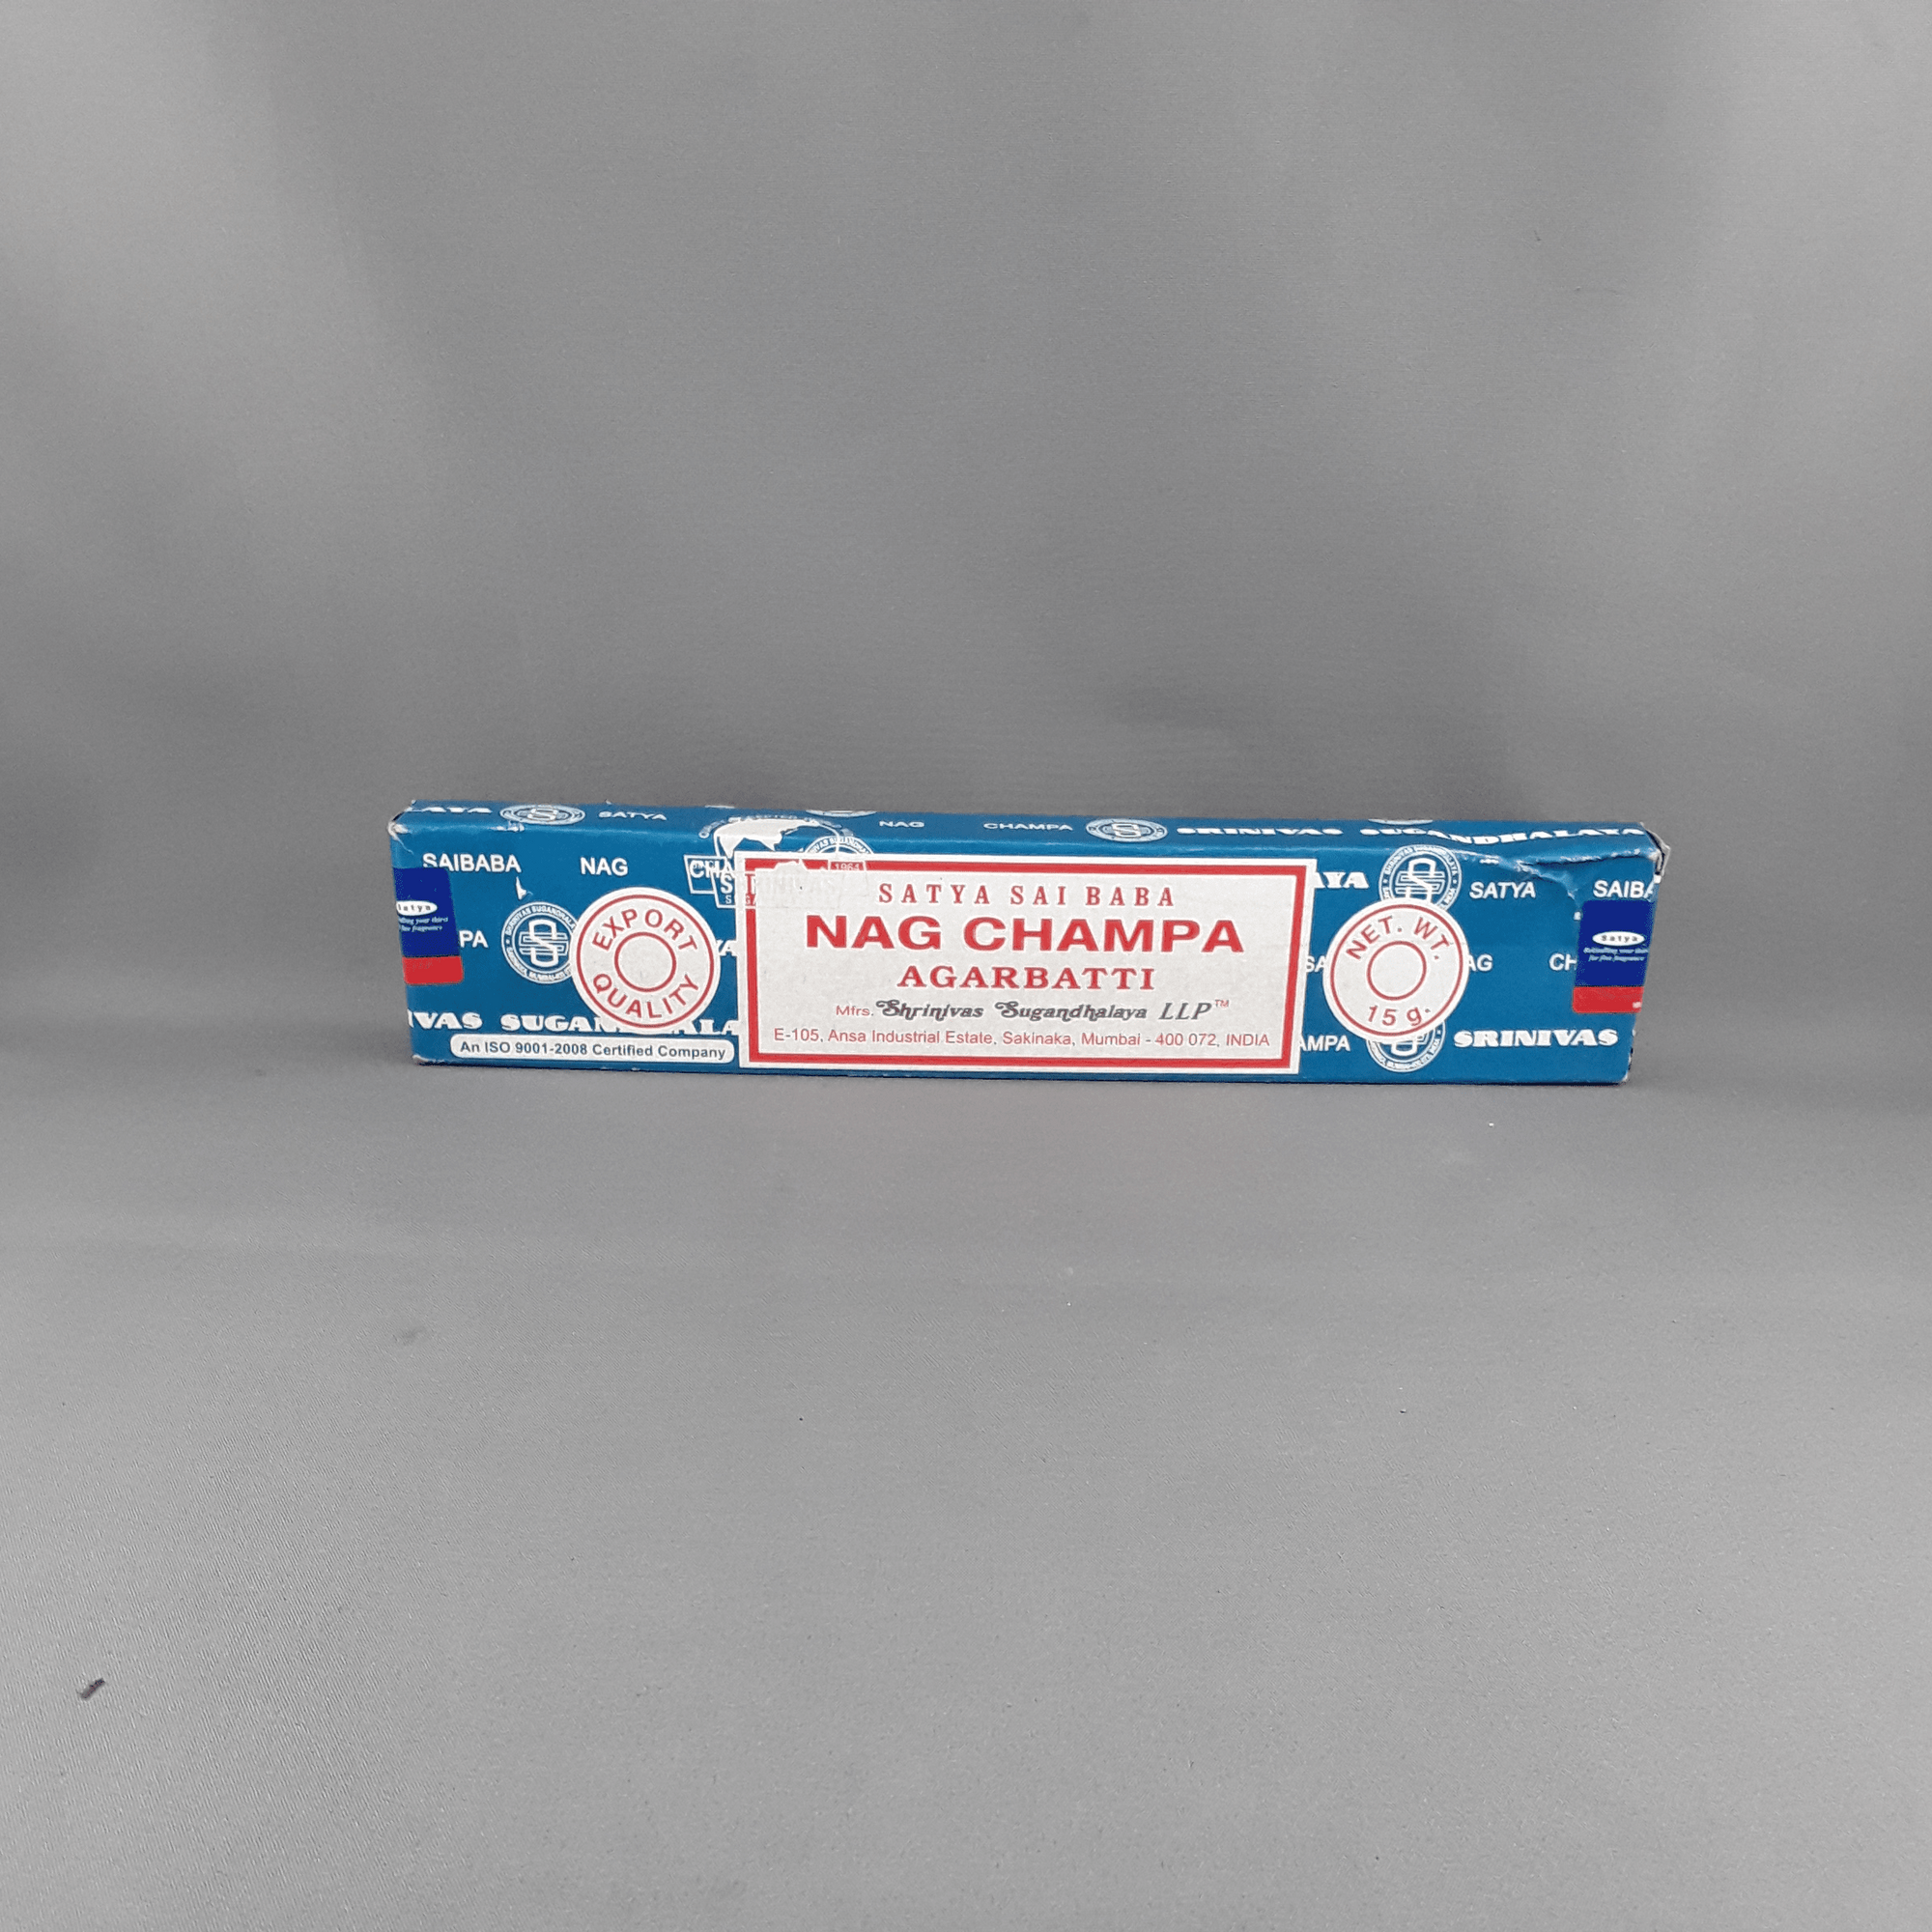 Incense from India | Nag Champa - Birdie’s Nest Inc 